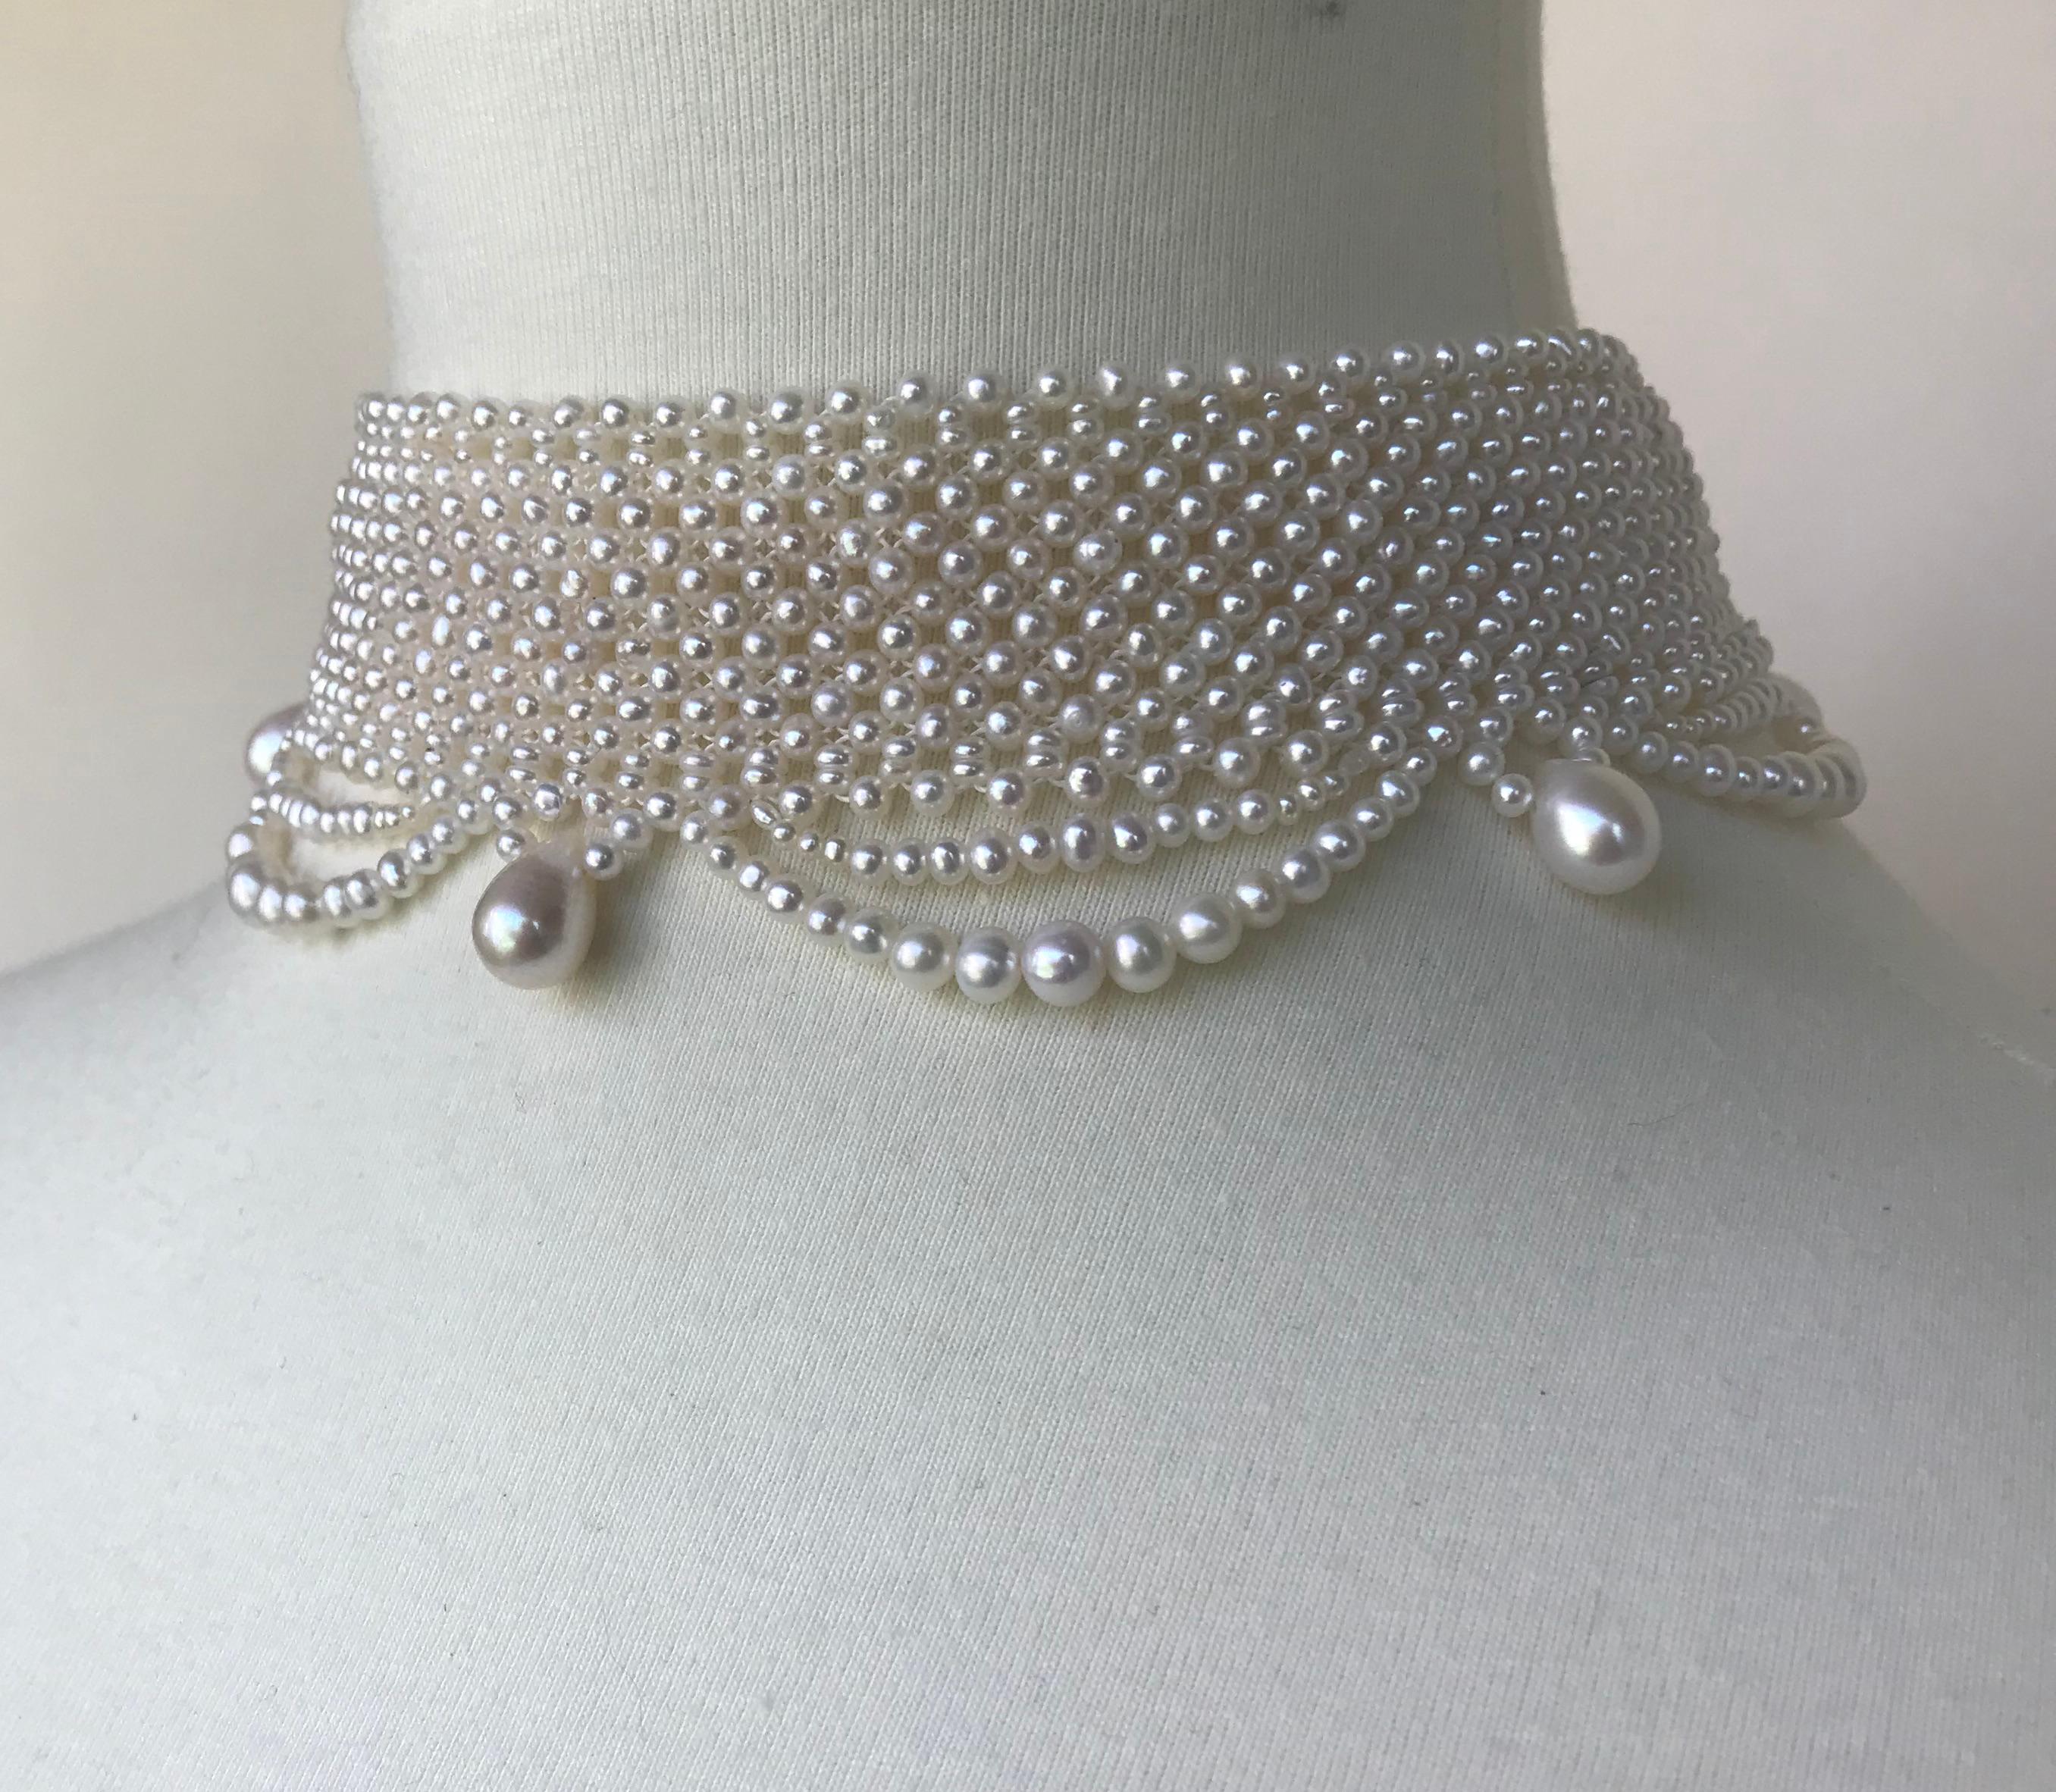 Artist Marina J. Woven Pearl Draped Choker with Pearl drops and secure sliding clasp